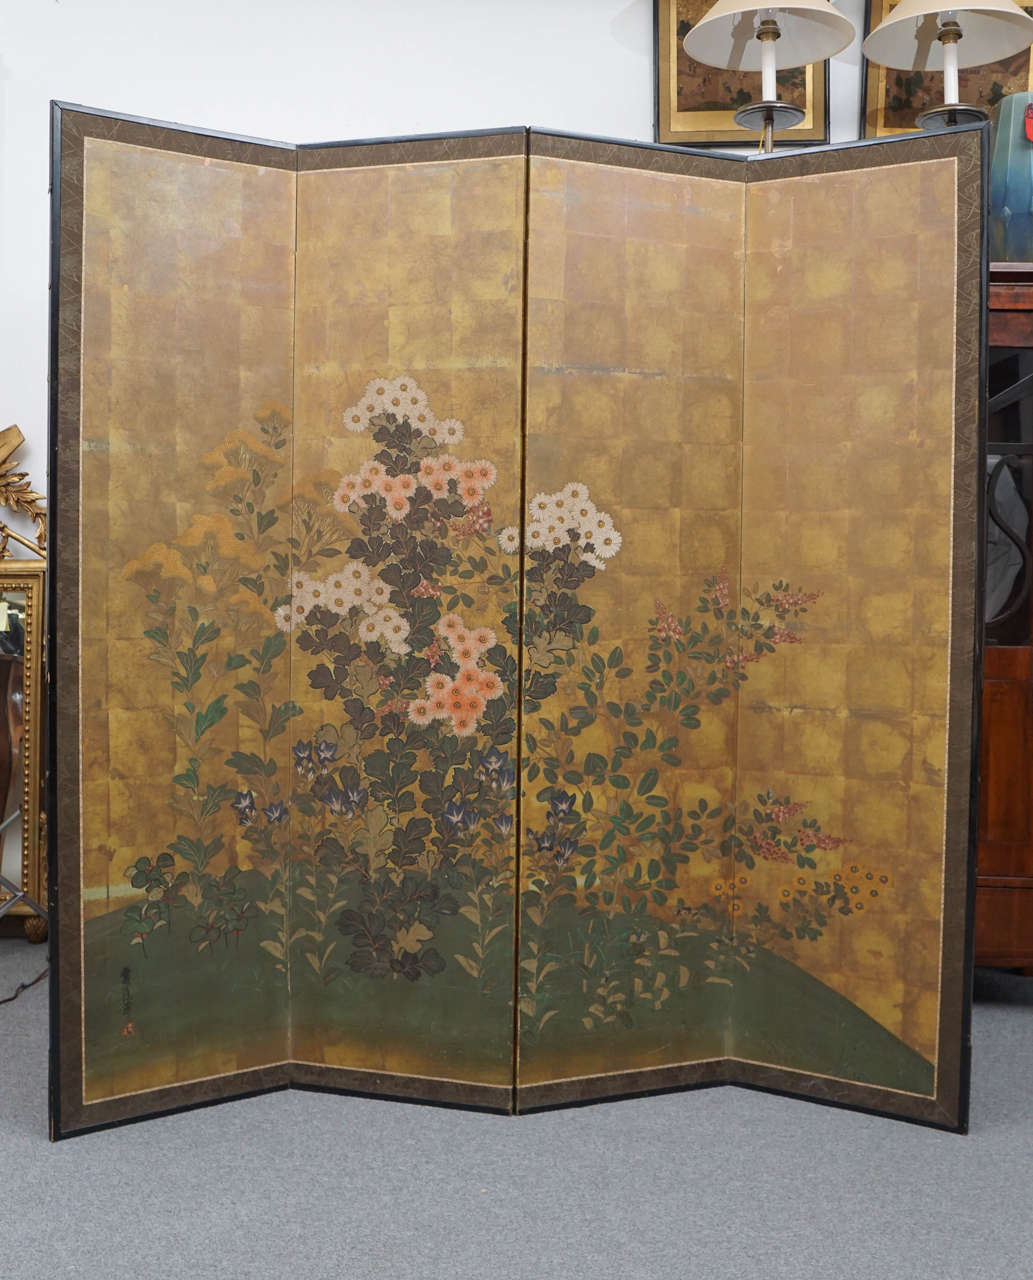 Four panel floral screen on gold leaf. Japanese Showa period.
Measures: 71